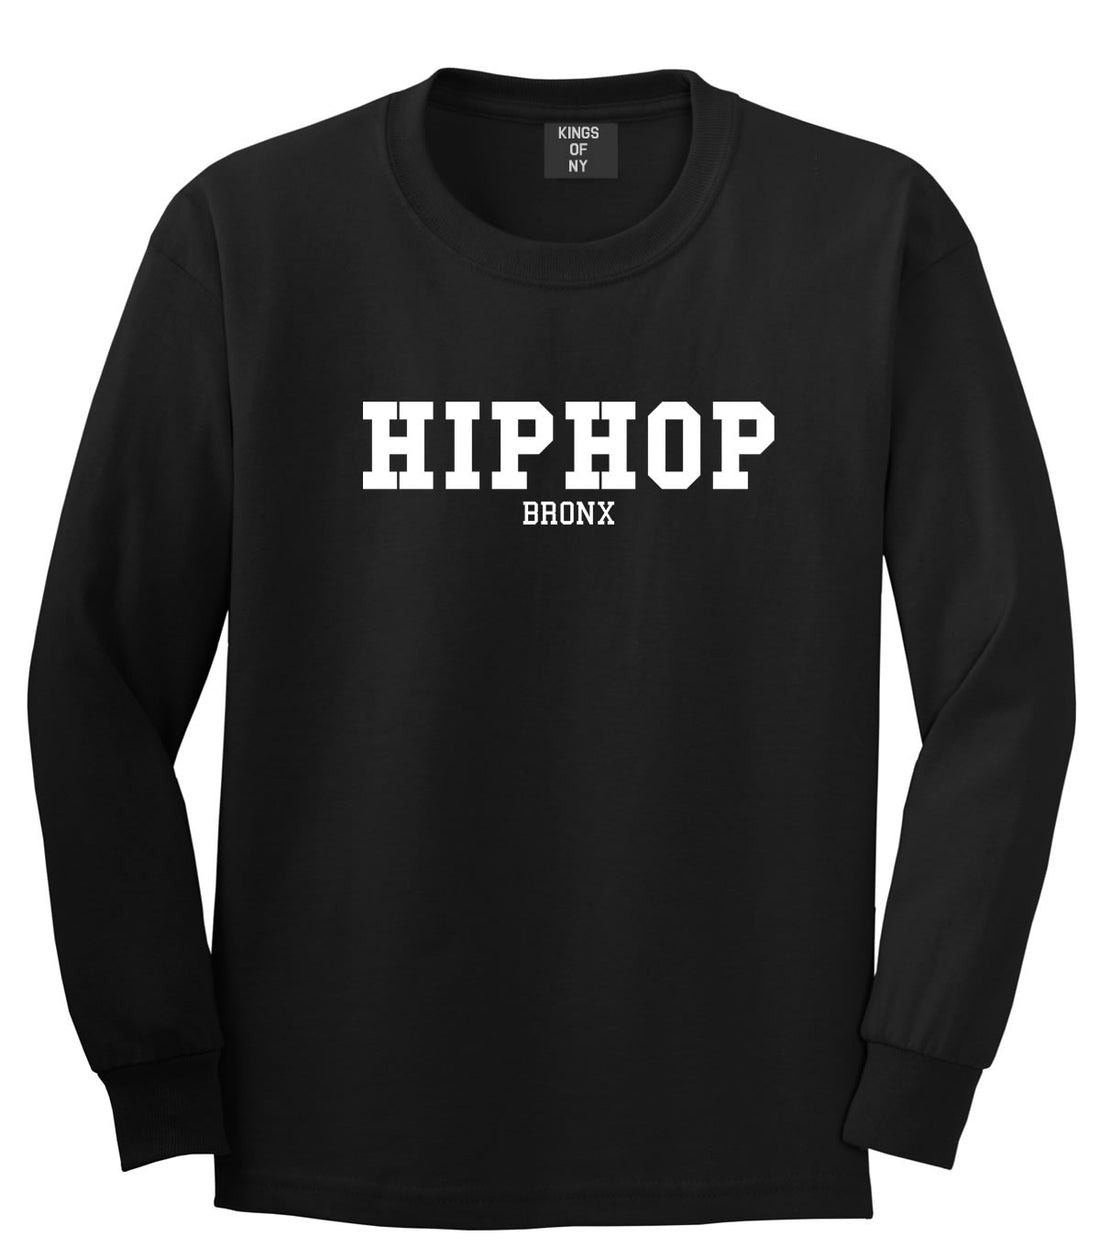 Hiphop the Bronx Long Sleeve T-Shirt in Black by Kings Of NY